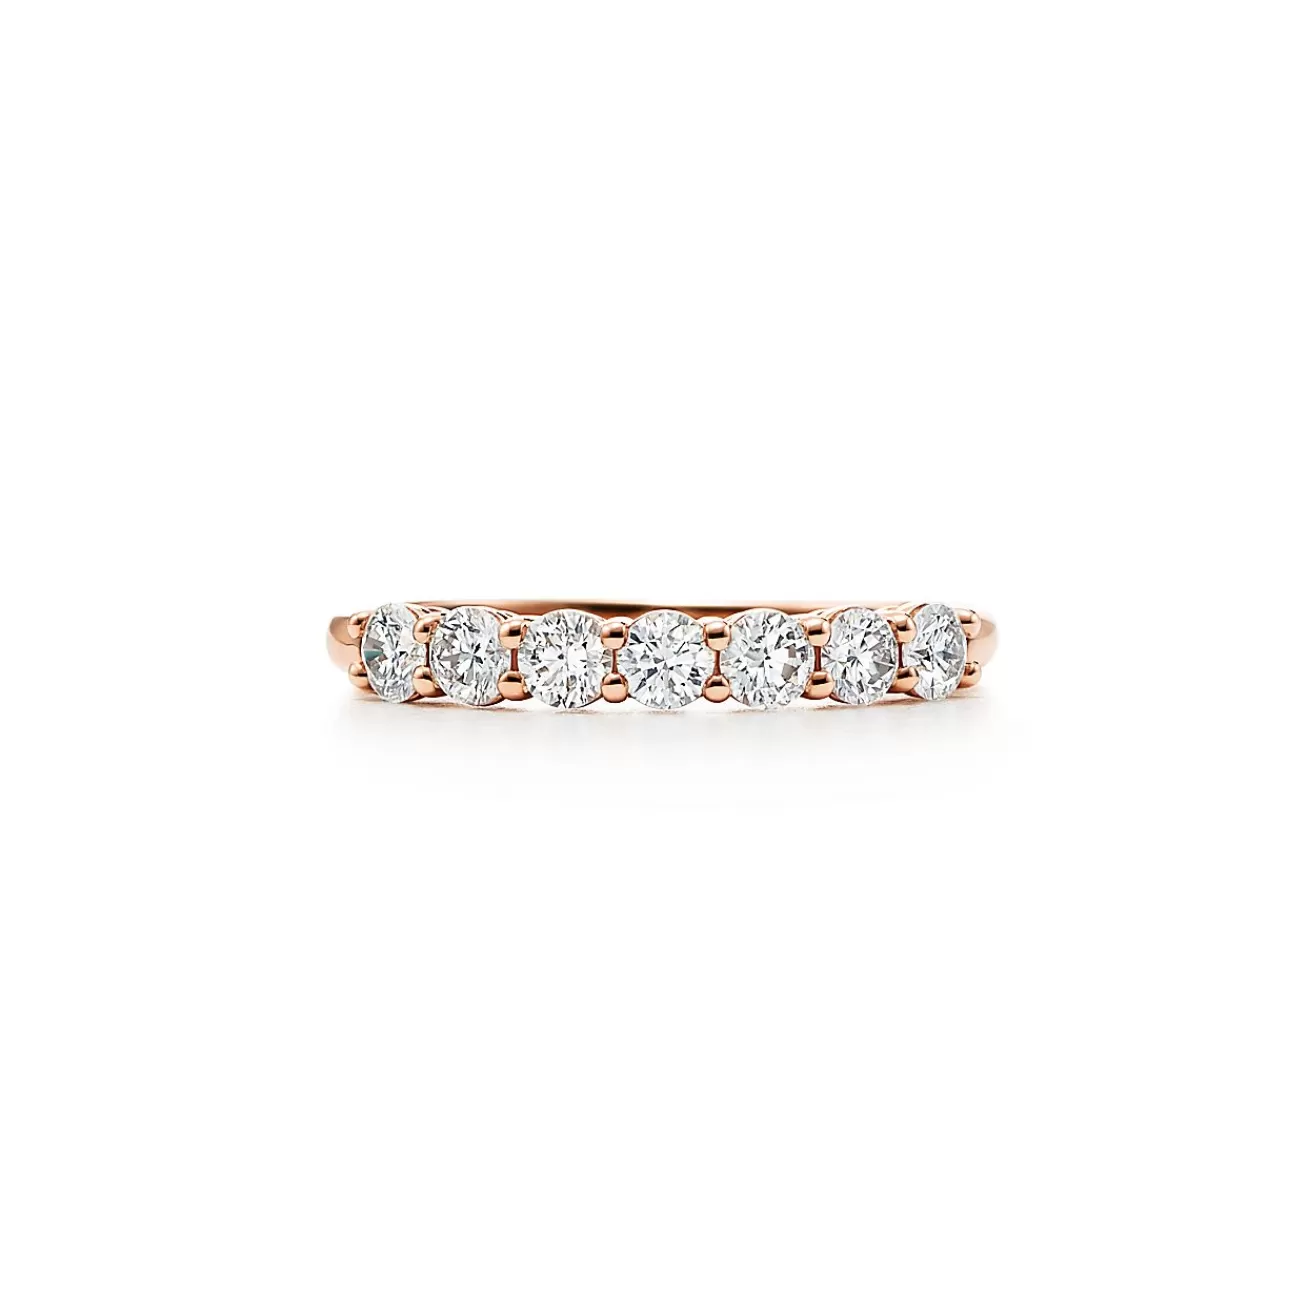 Tiffany & Co. Tiffany Forever Band Ring in Rose Gold with a Half-circle of Diamonds, 3 mm Wide | ^Women Rings | Stacking Rings